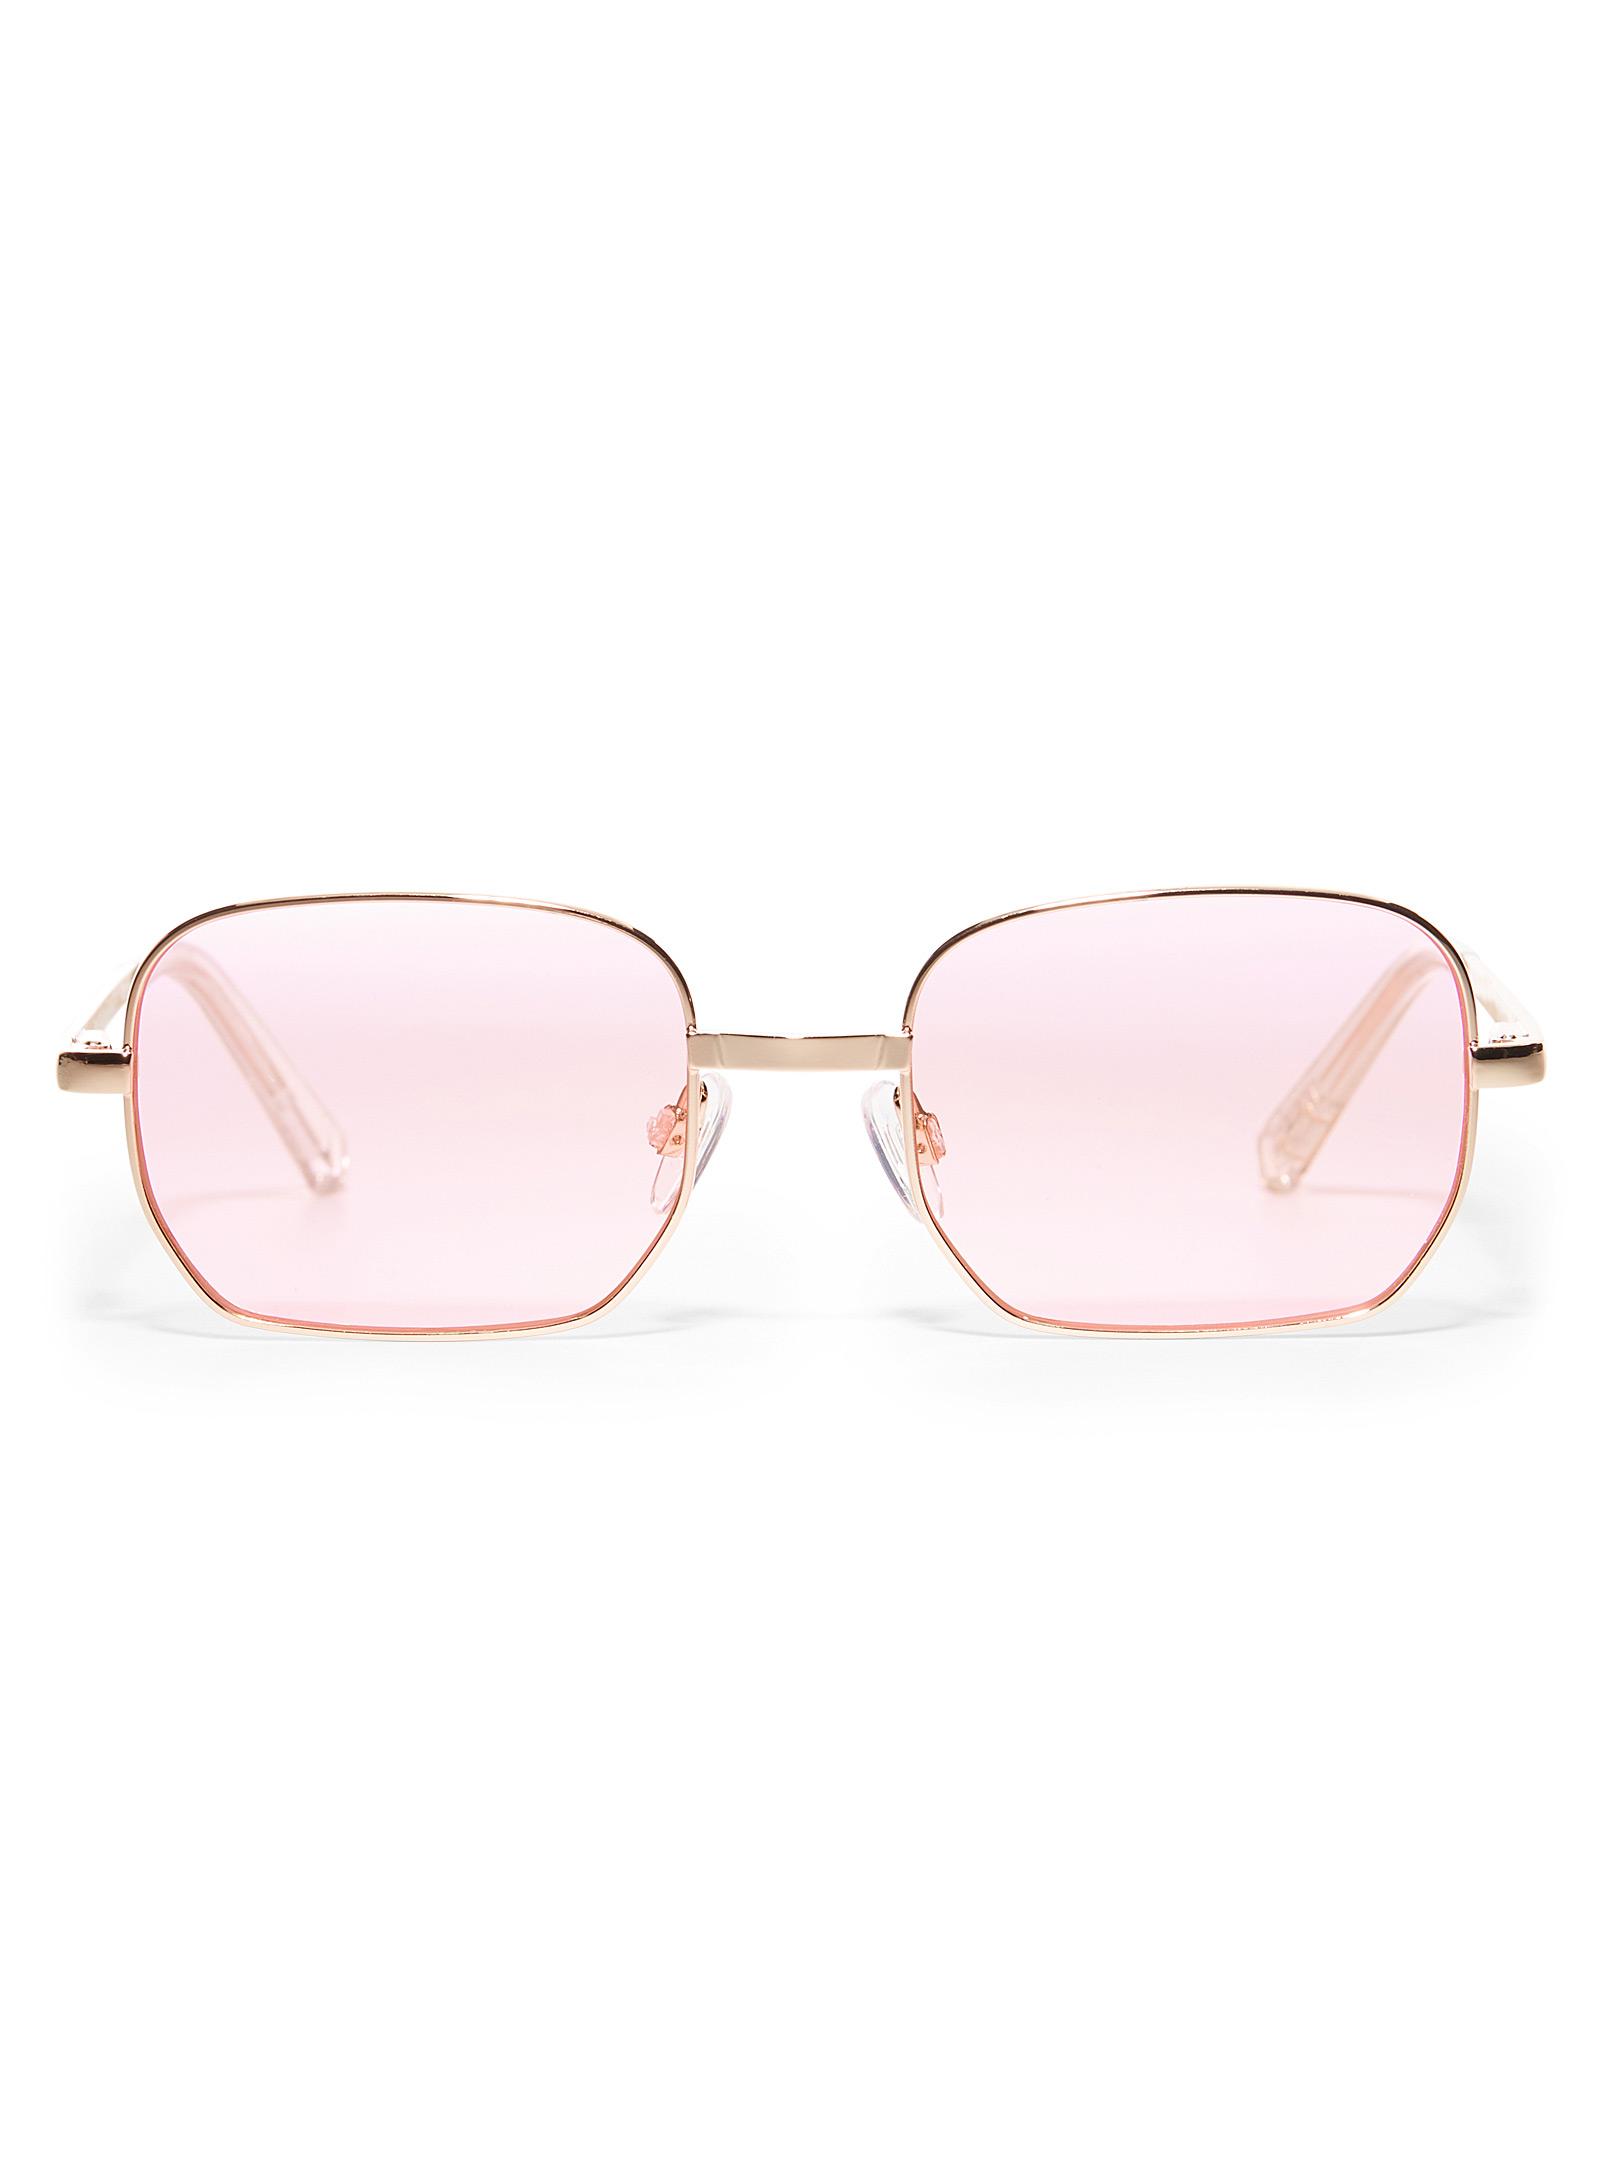 Le Specs The Flash Rectangular Sunglasses in Pink - Lyst